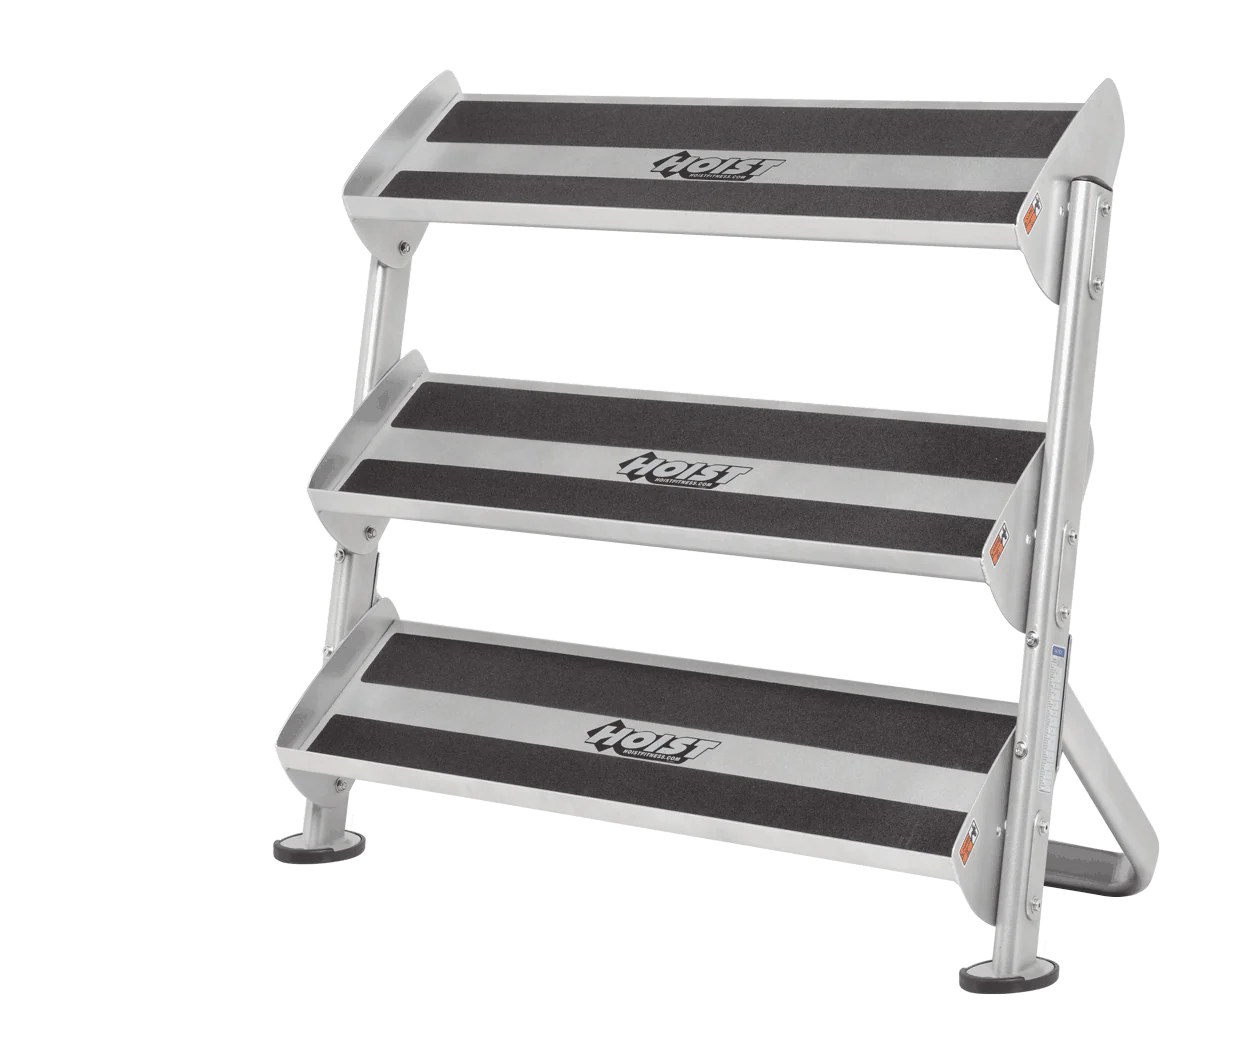 Hoist 36" Dumbbell Rack with Opt (3rd Tier) | Fitness Experience 